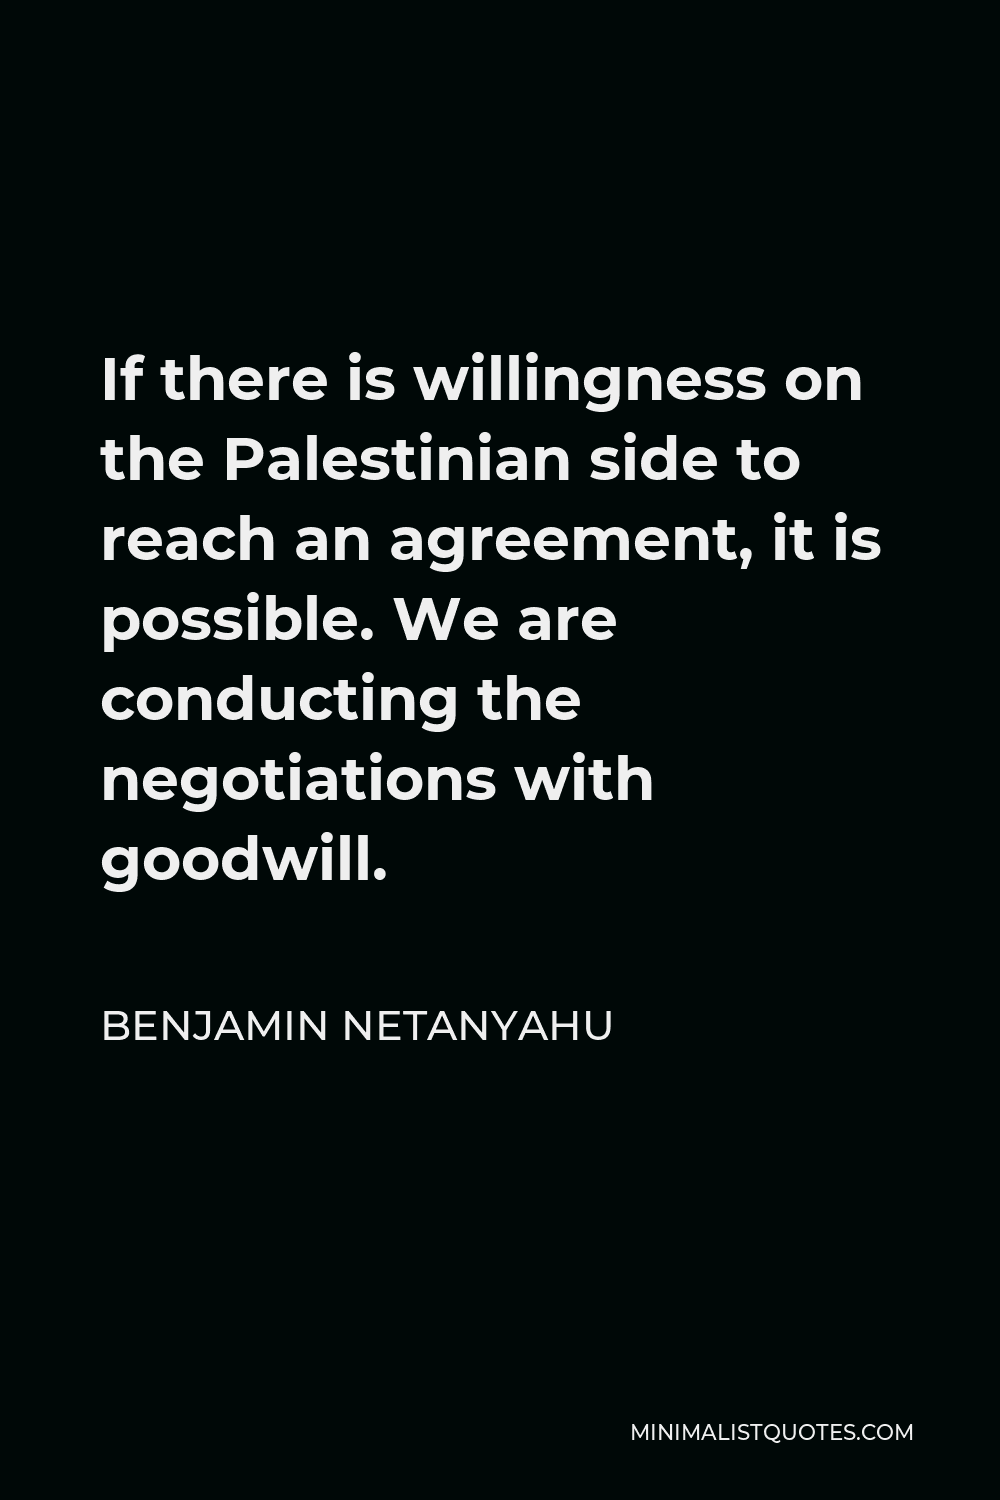 Benjamin Netanyahu Quote - If there is willingness on the Palestinian side to reach an agreement, it is possible. We are conducting the negotiations with goodwill.